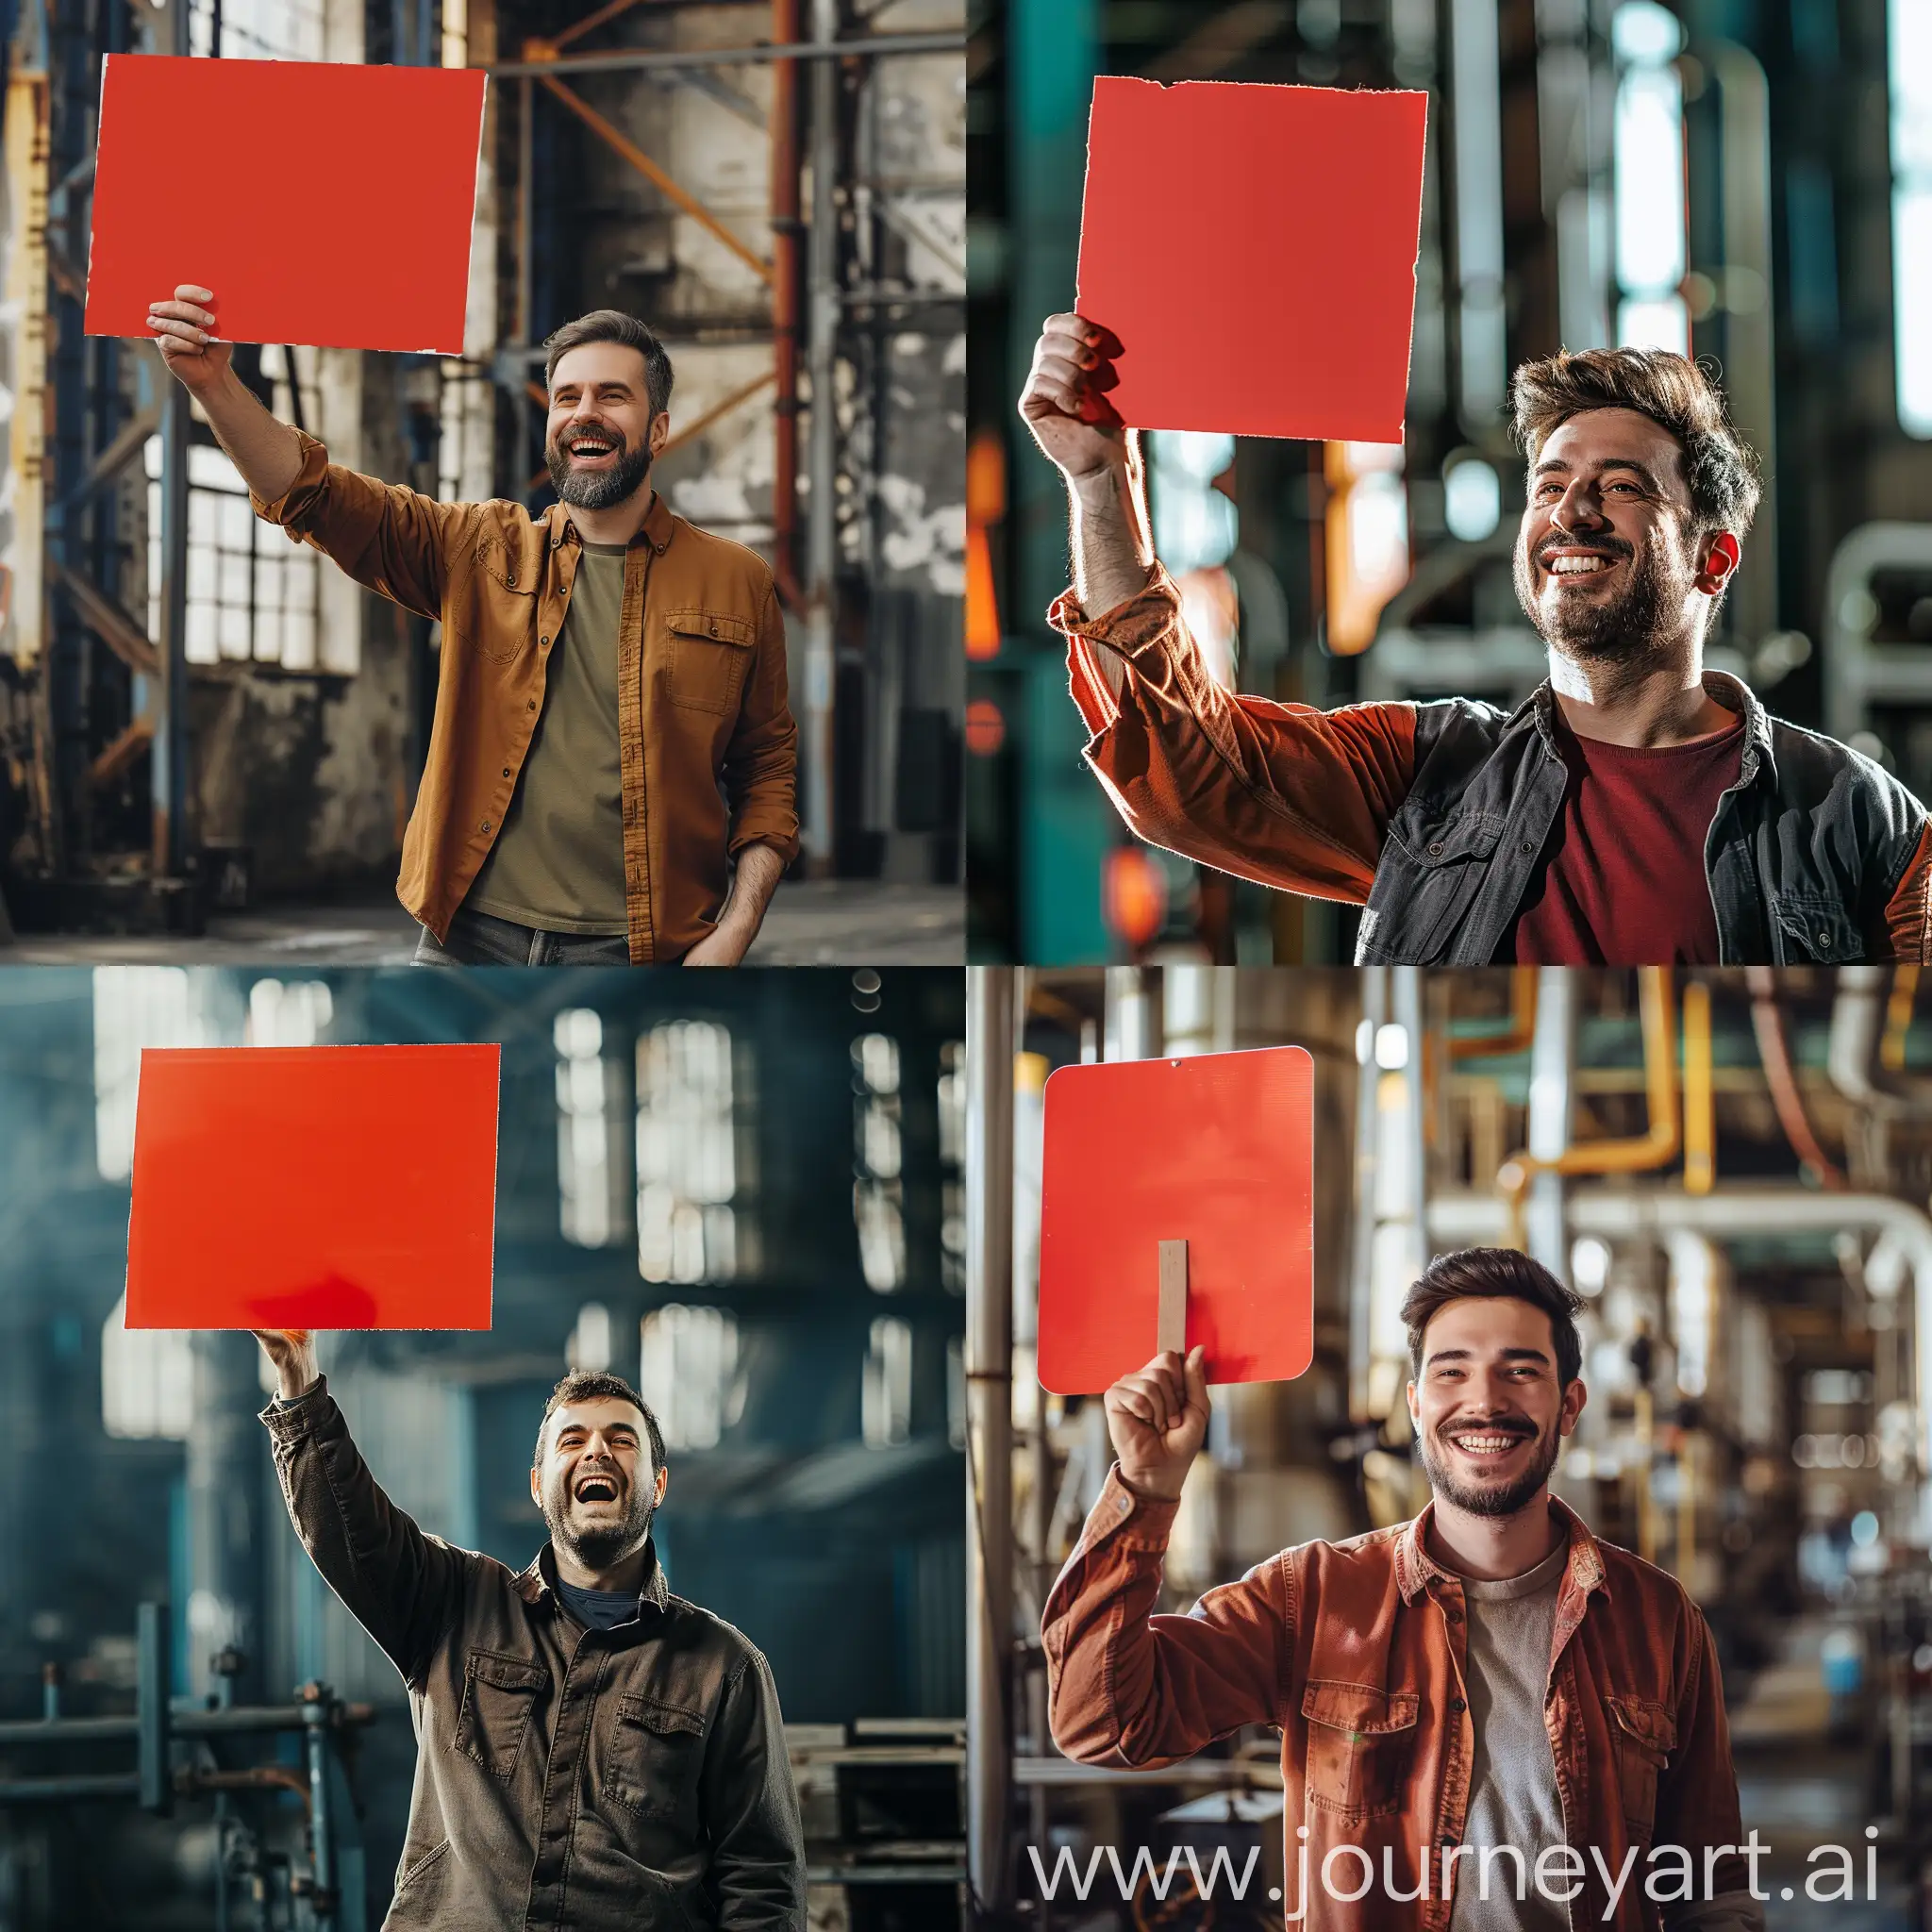 Cheerful-Man-Holding-Red-High-Sign-against-Industrial-Backdrop